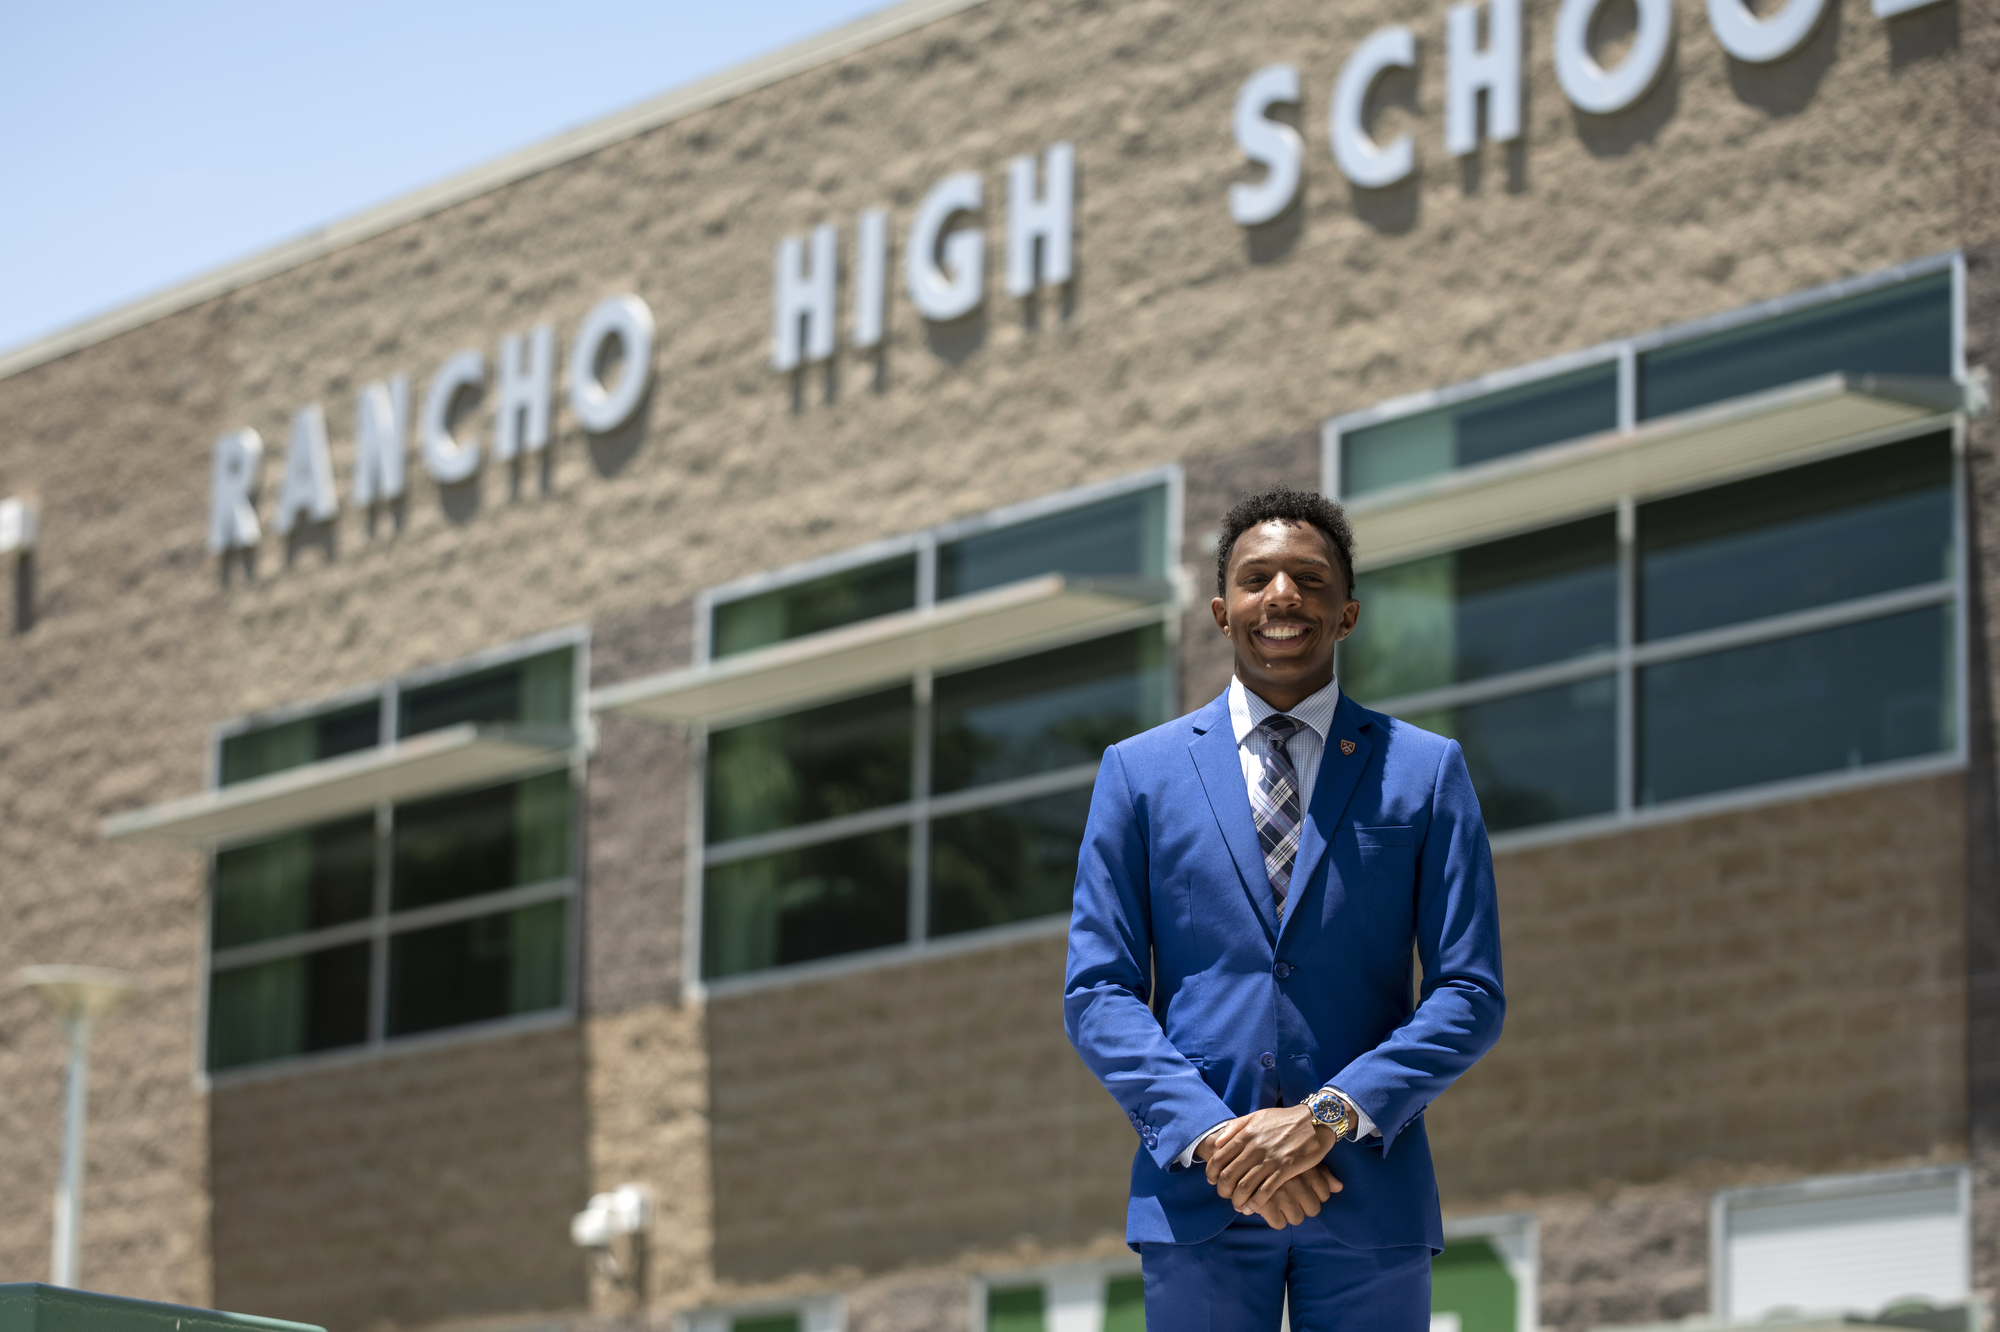 John Cooke poses for a portrait at his alma mater Rancho High School in Las Vegas on Monday, July 3, 2023. (Daniel Clark/The Nevada Independent).